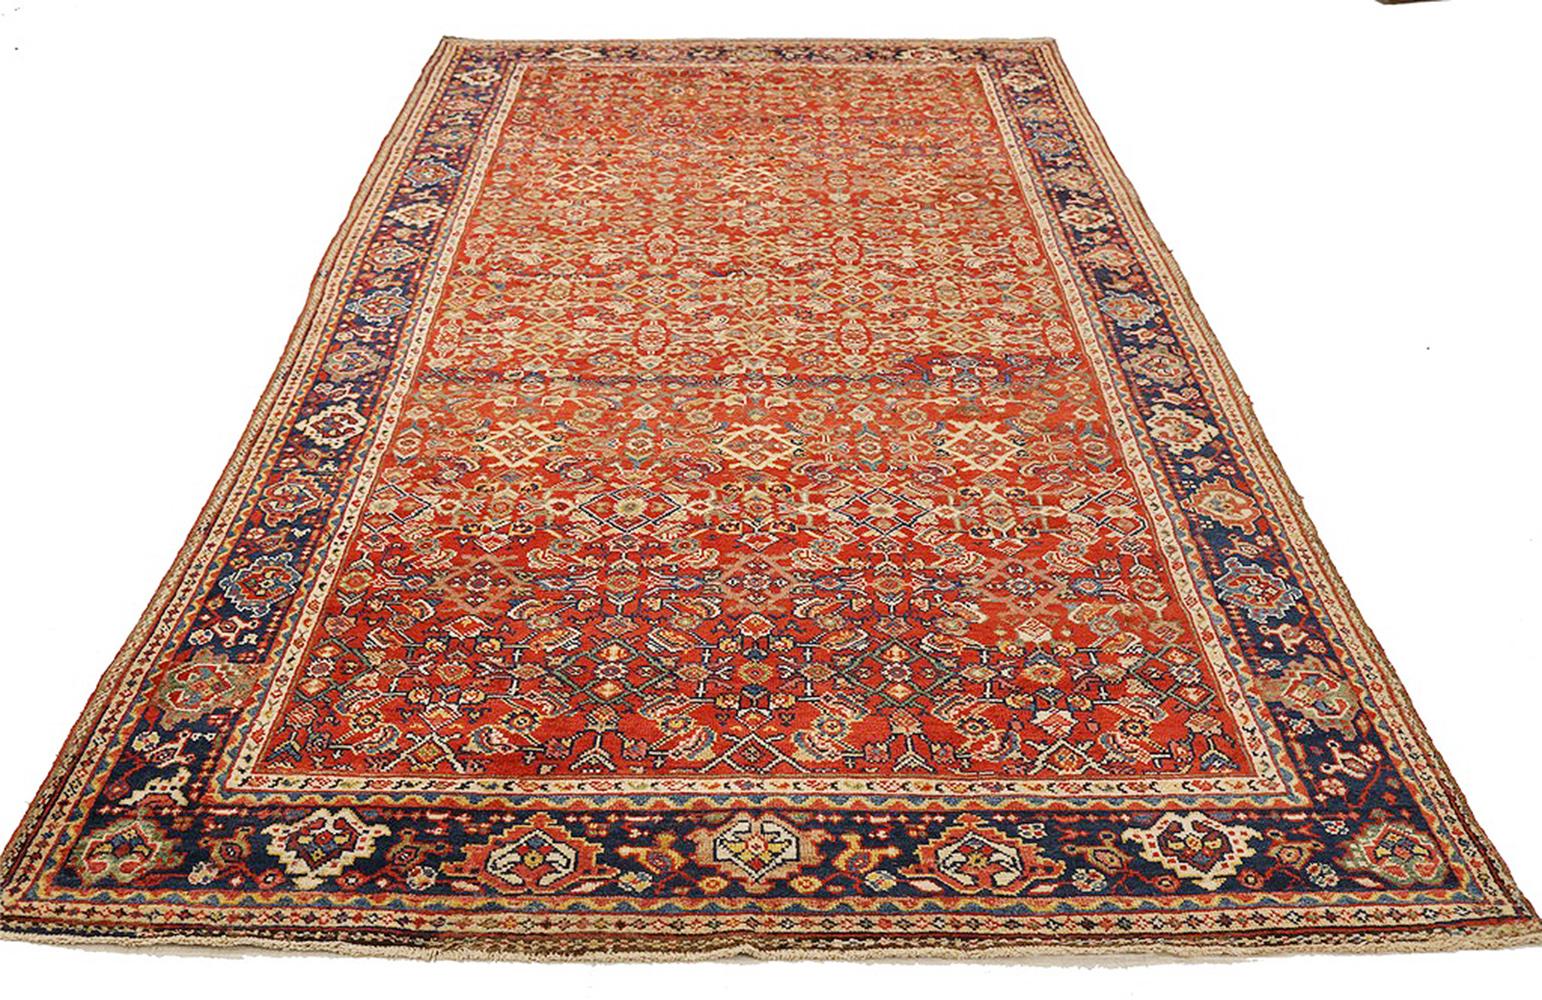 Antique handmade Persian area rug from high-quality sheep’s wool and colored with eco-friendly vegetable dyes that are proven safe for humans and pets alike. It’s a Classic Sultanabad design showcasing a regal red field with prominent green and